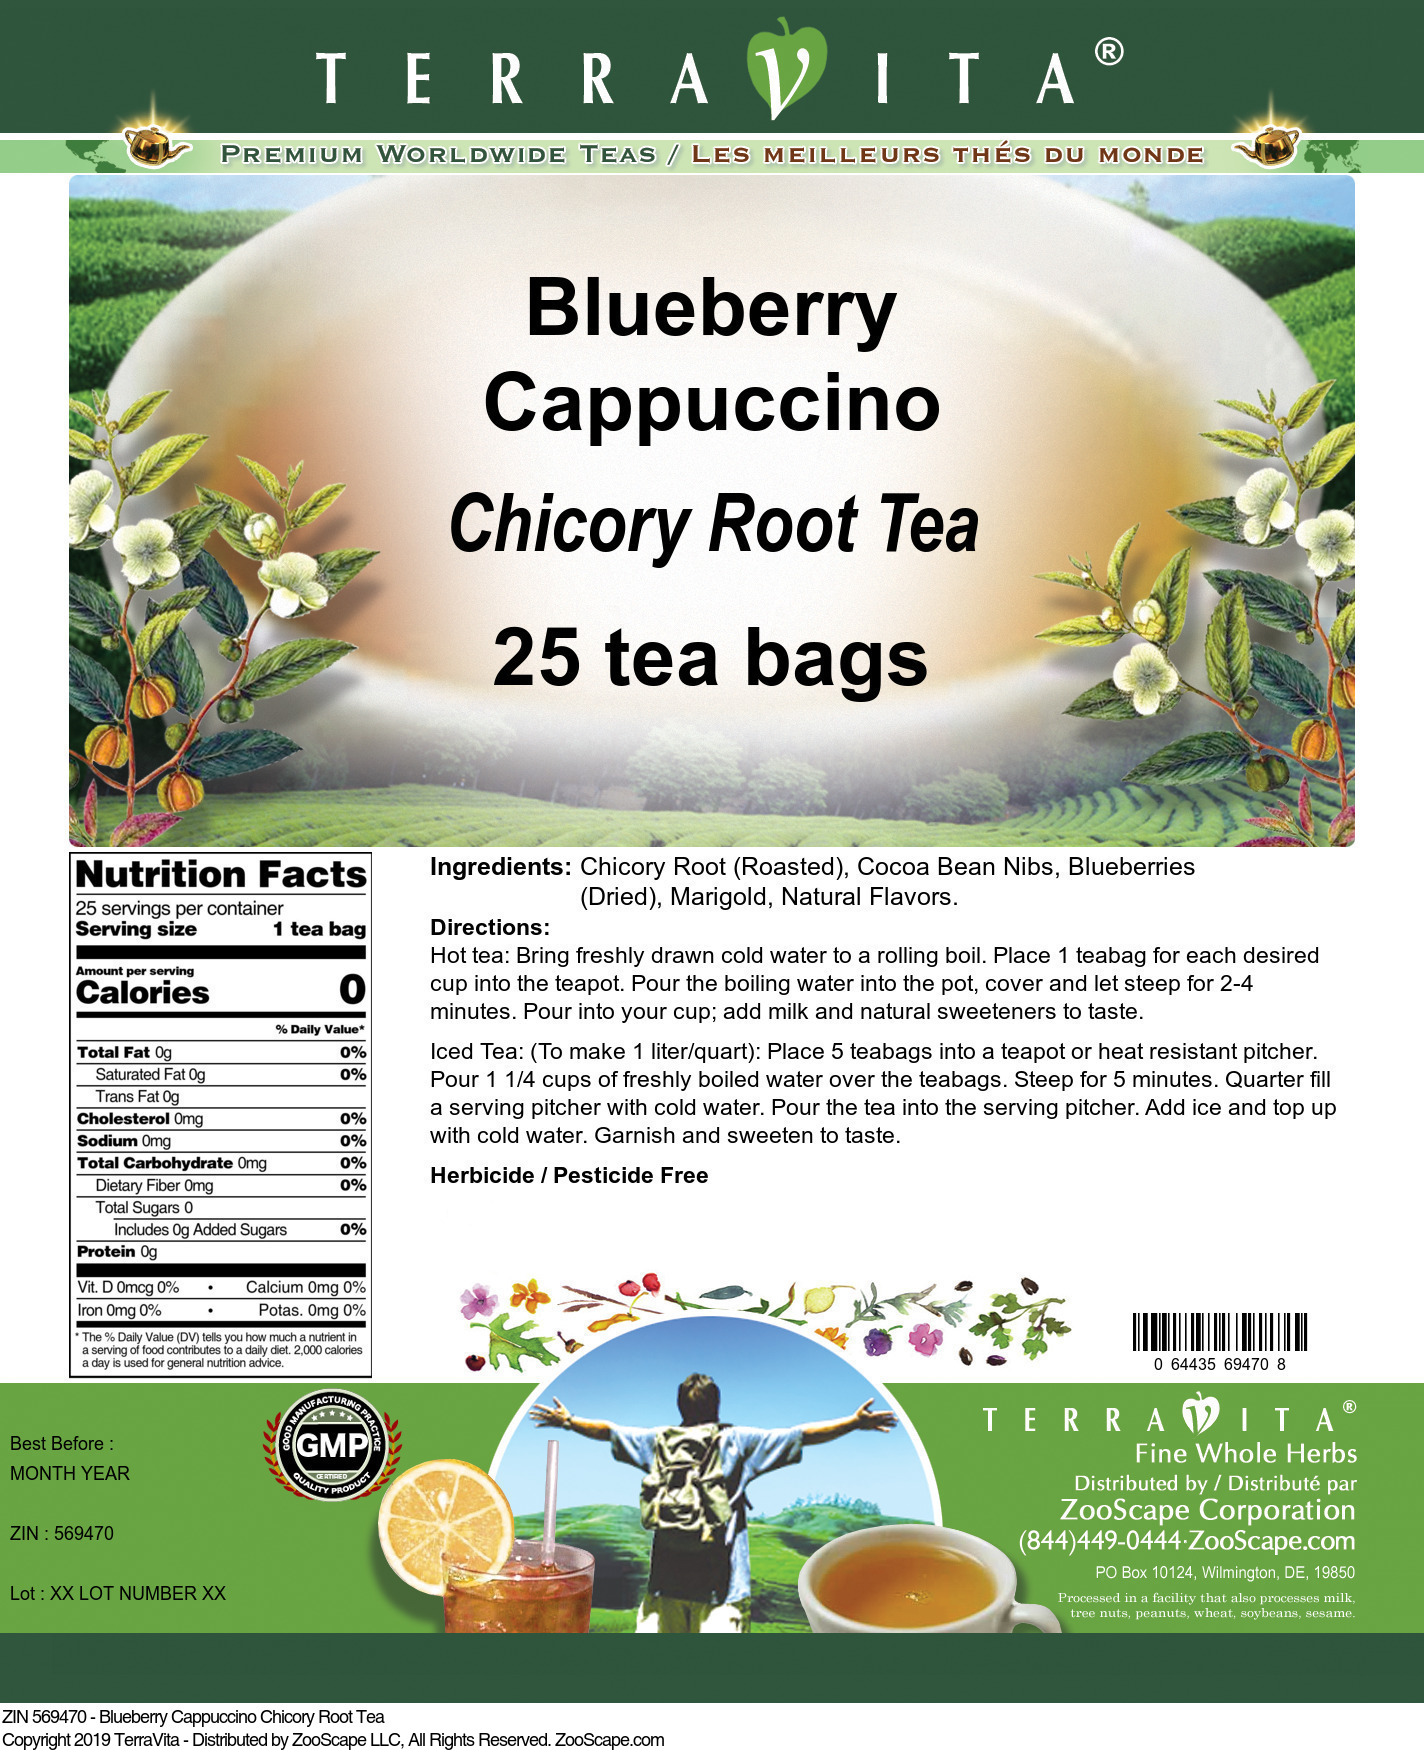 Blueberry Cappuccino Chicory Root Tea - Label